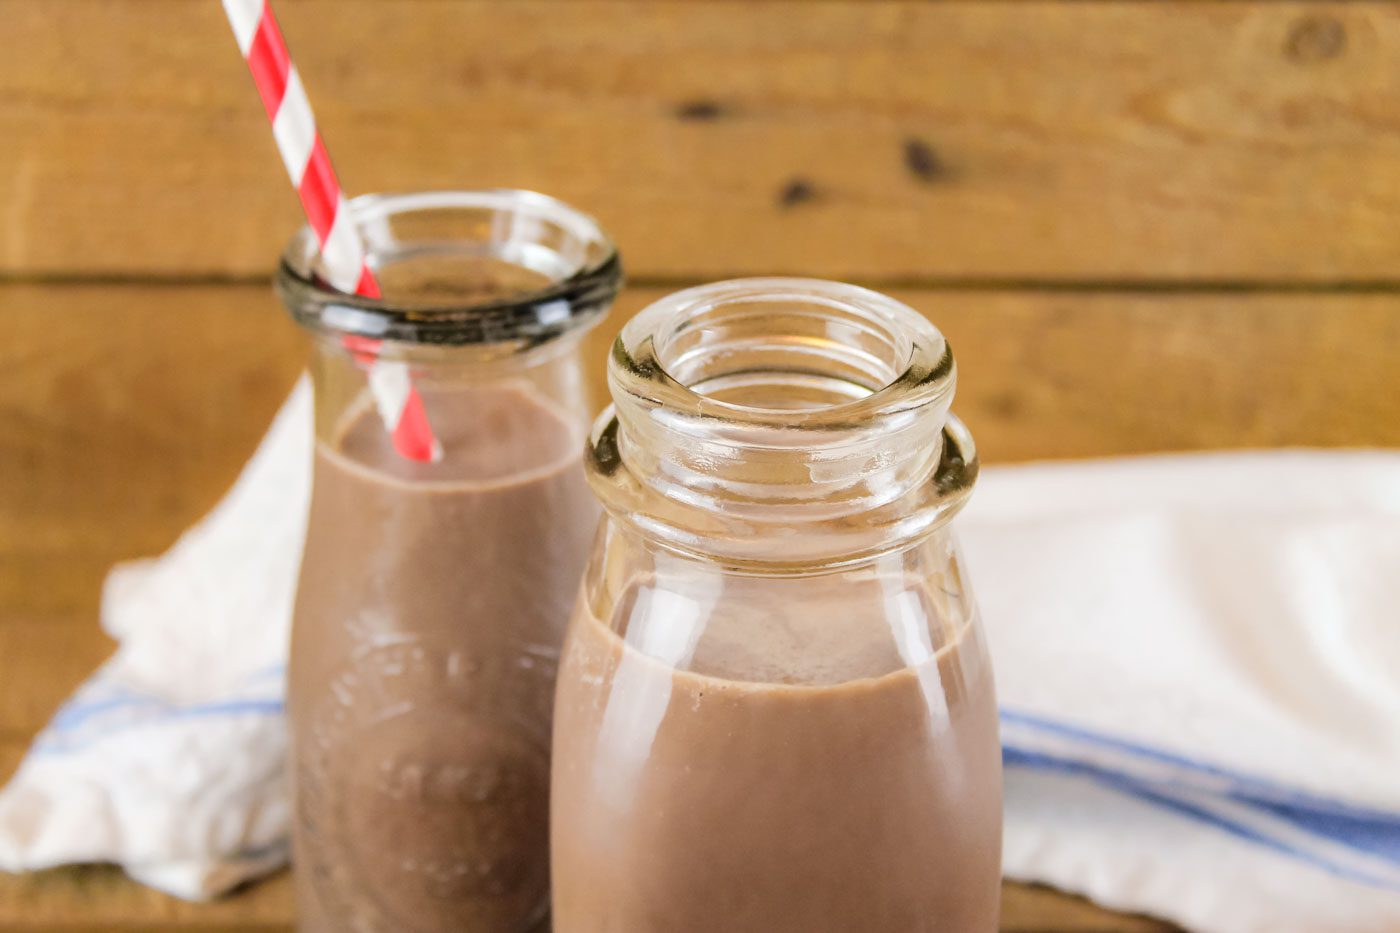 2 bottles of chocolate milk. one bottle has a red and white striped straw coming out of the top.